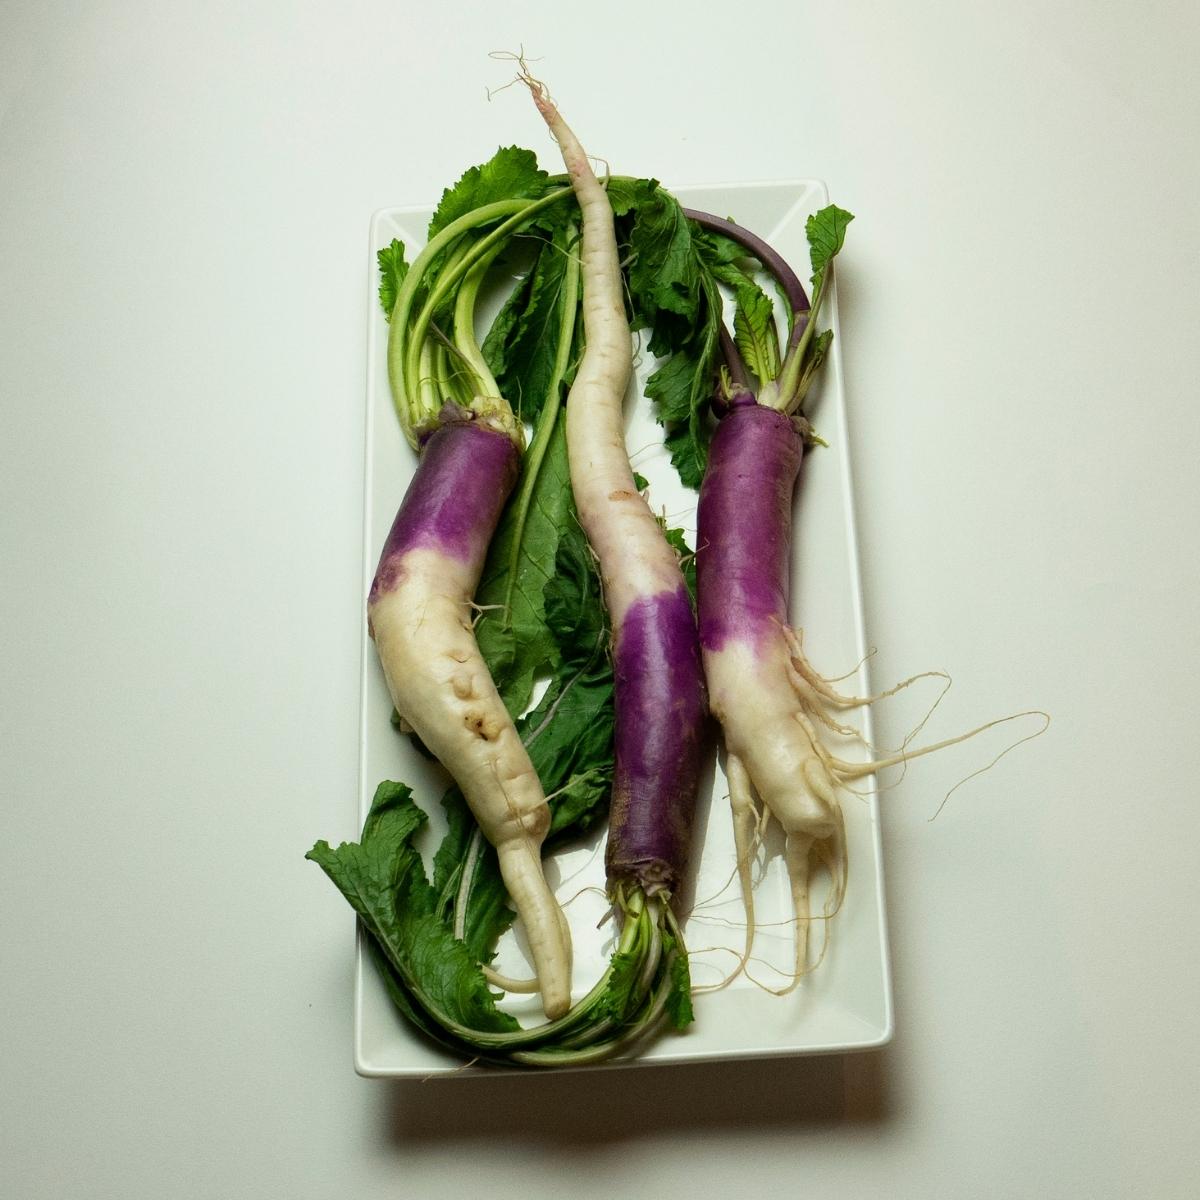 Long purple and white turnips with their greens on a white board.